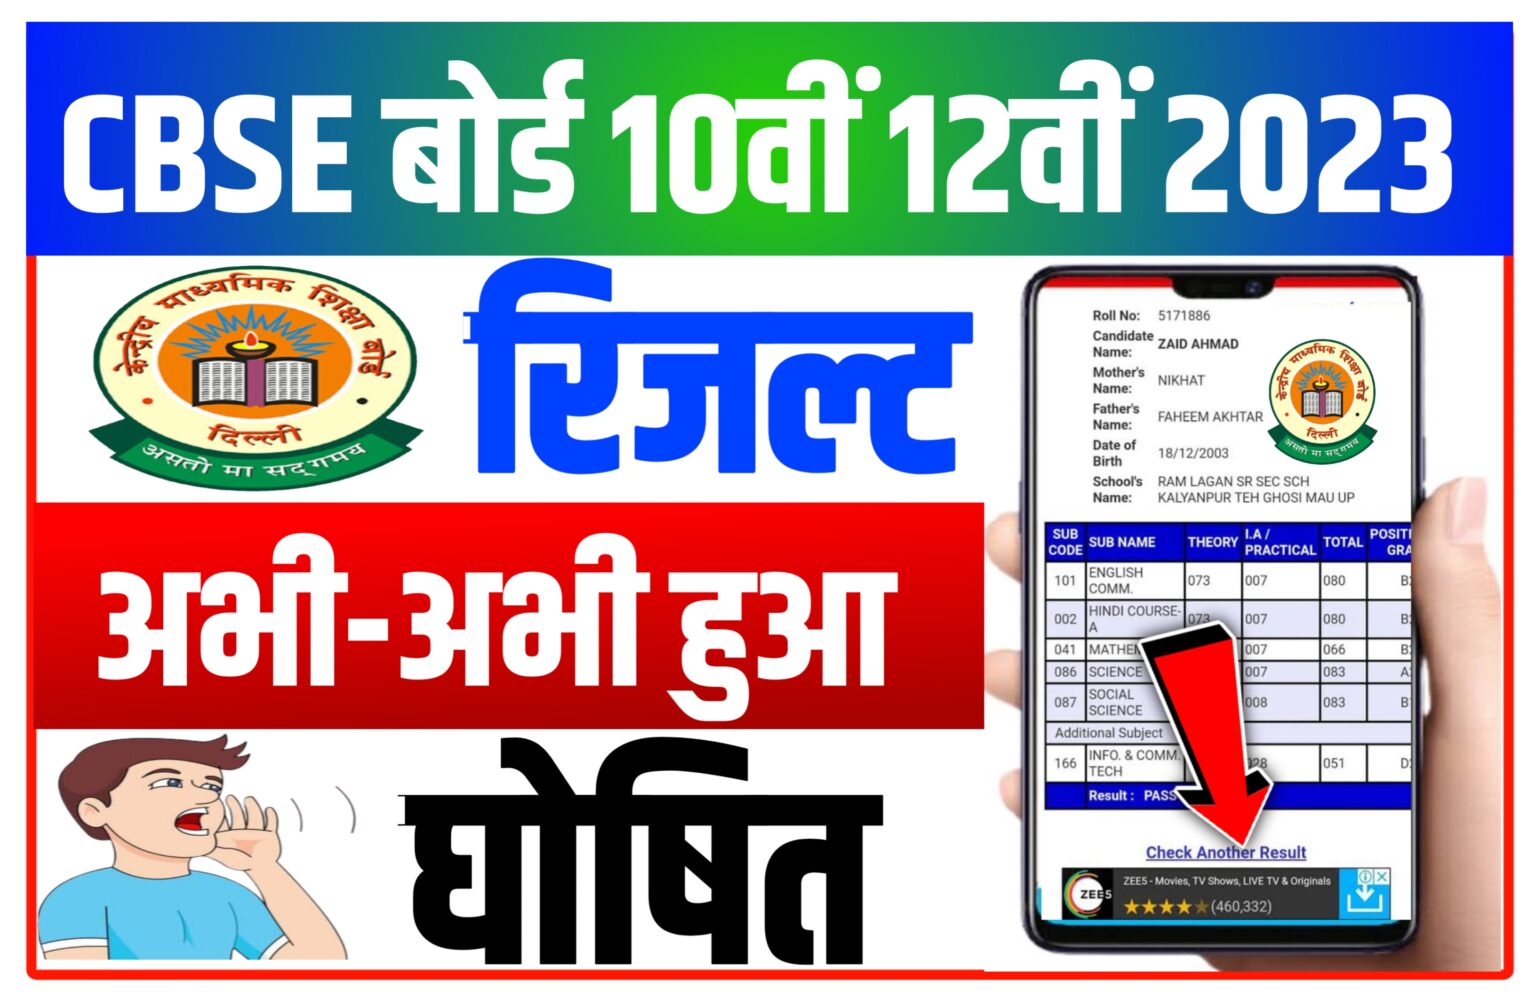 CBSE Class 10th 12th Result 2023